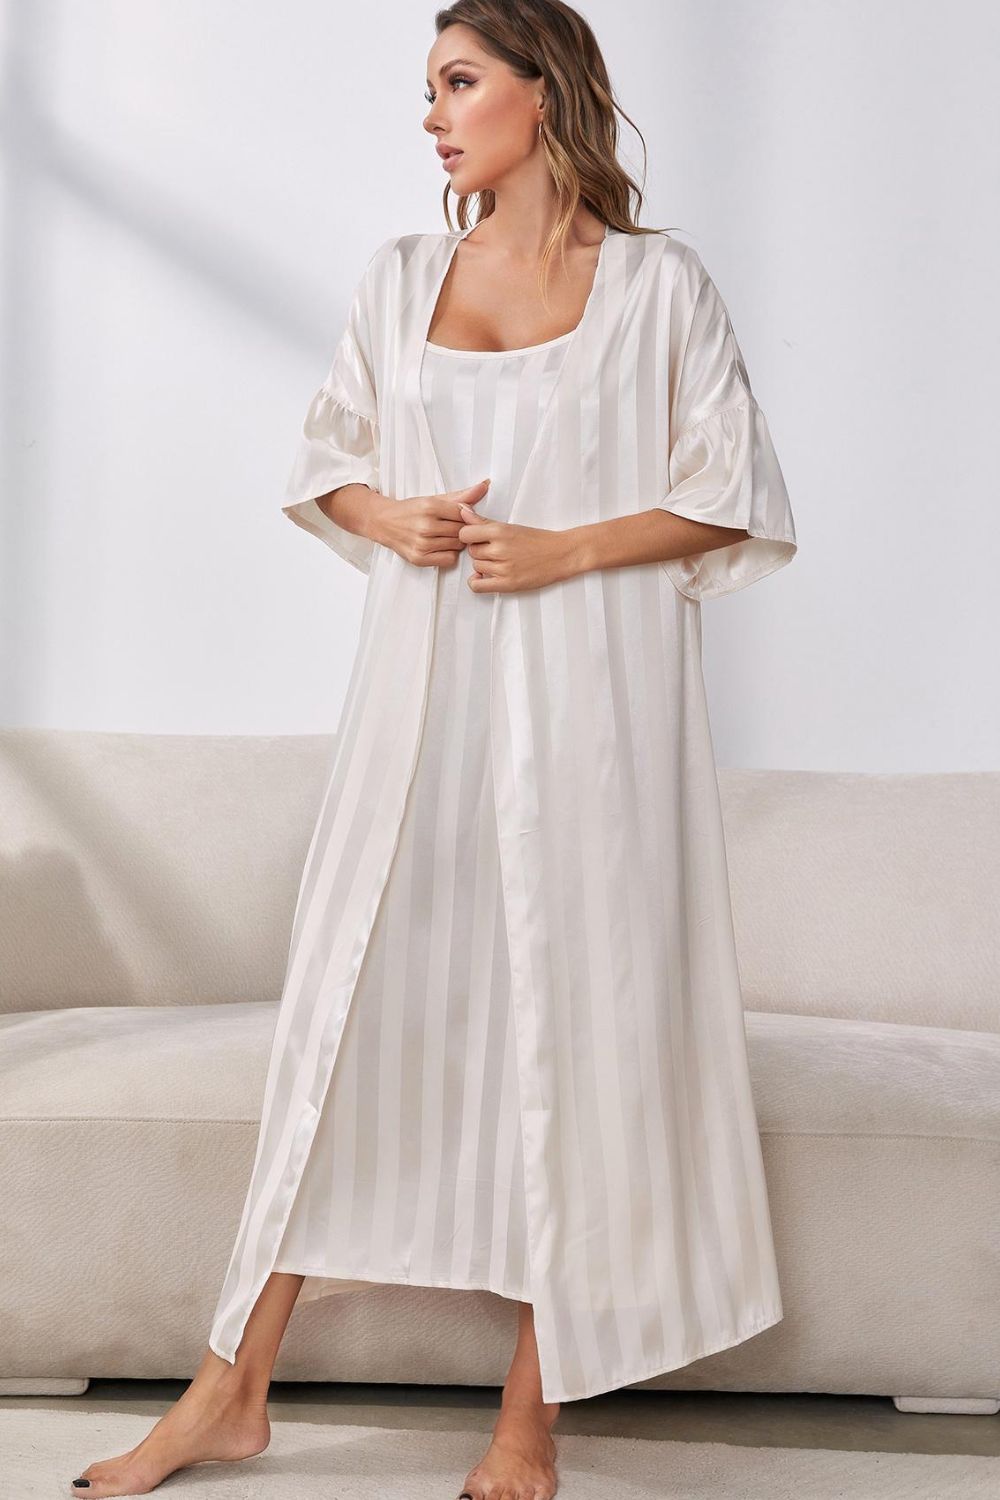 Woman standing in front of sofa wearing beige striped nightgown and matching beige striped robe